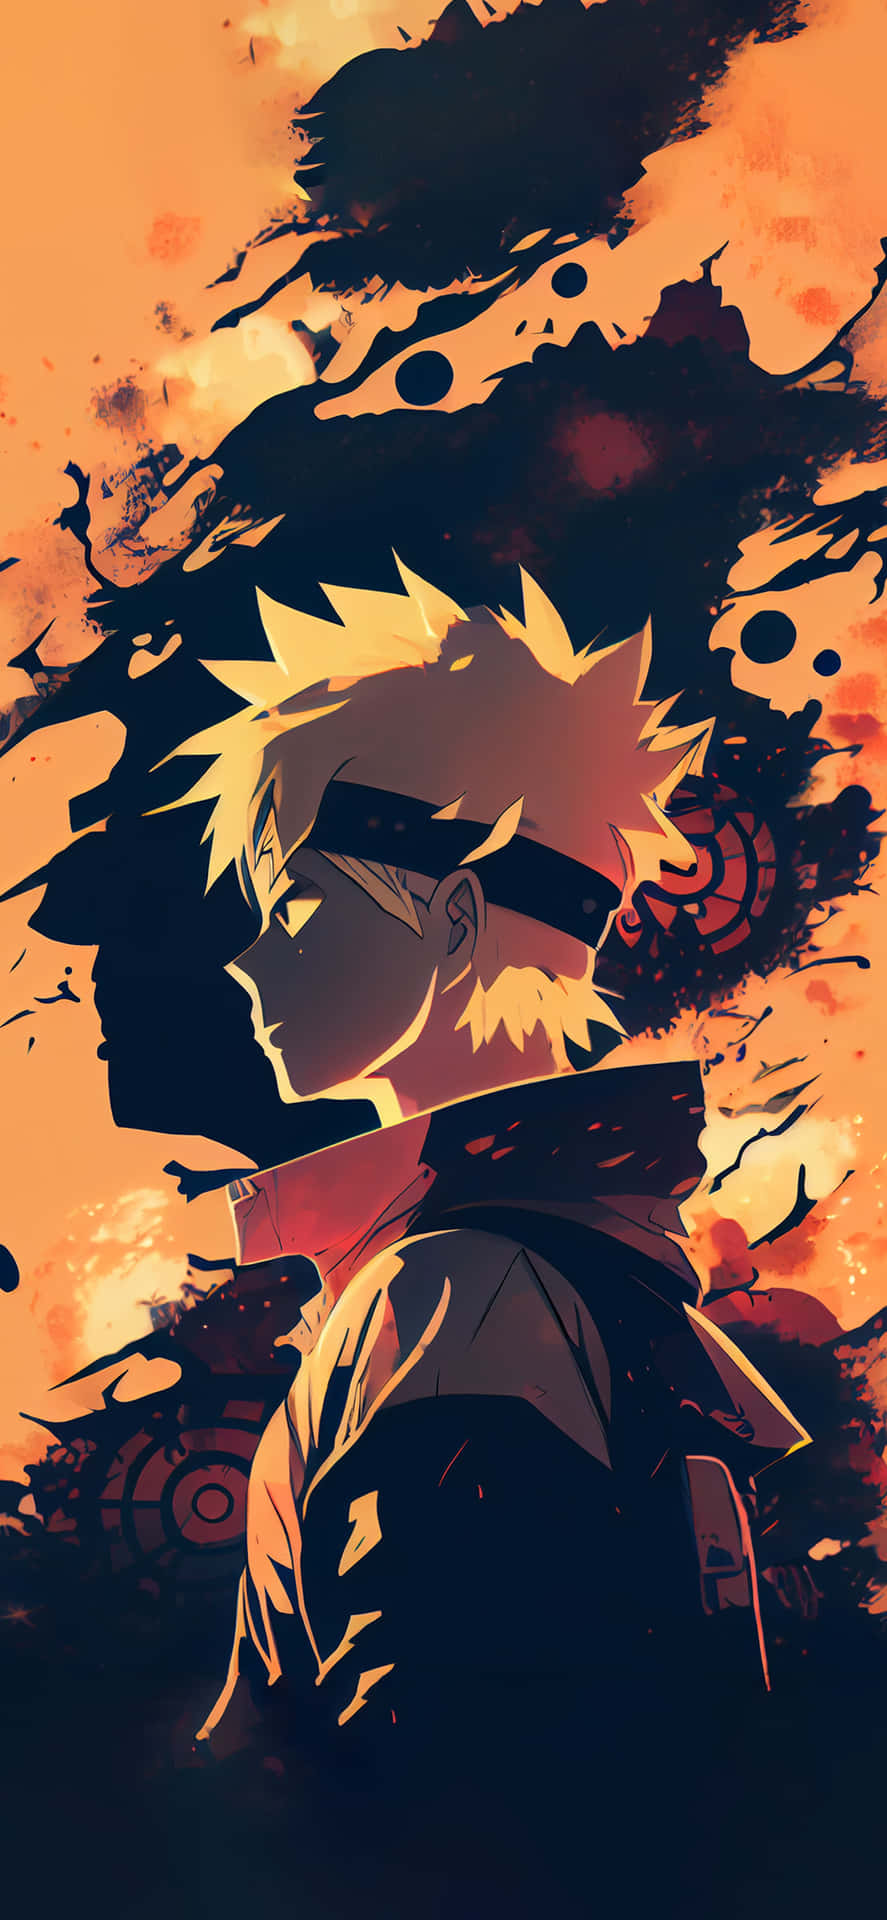 Naruto Pain iPhone Wallpapers -Top 25 Best Naruto Pain iPhone Wallpapers -  Getty Wallpapers